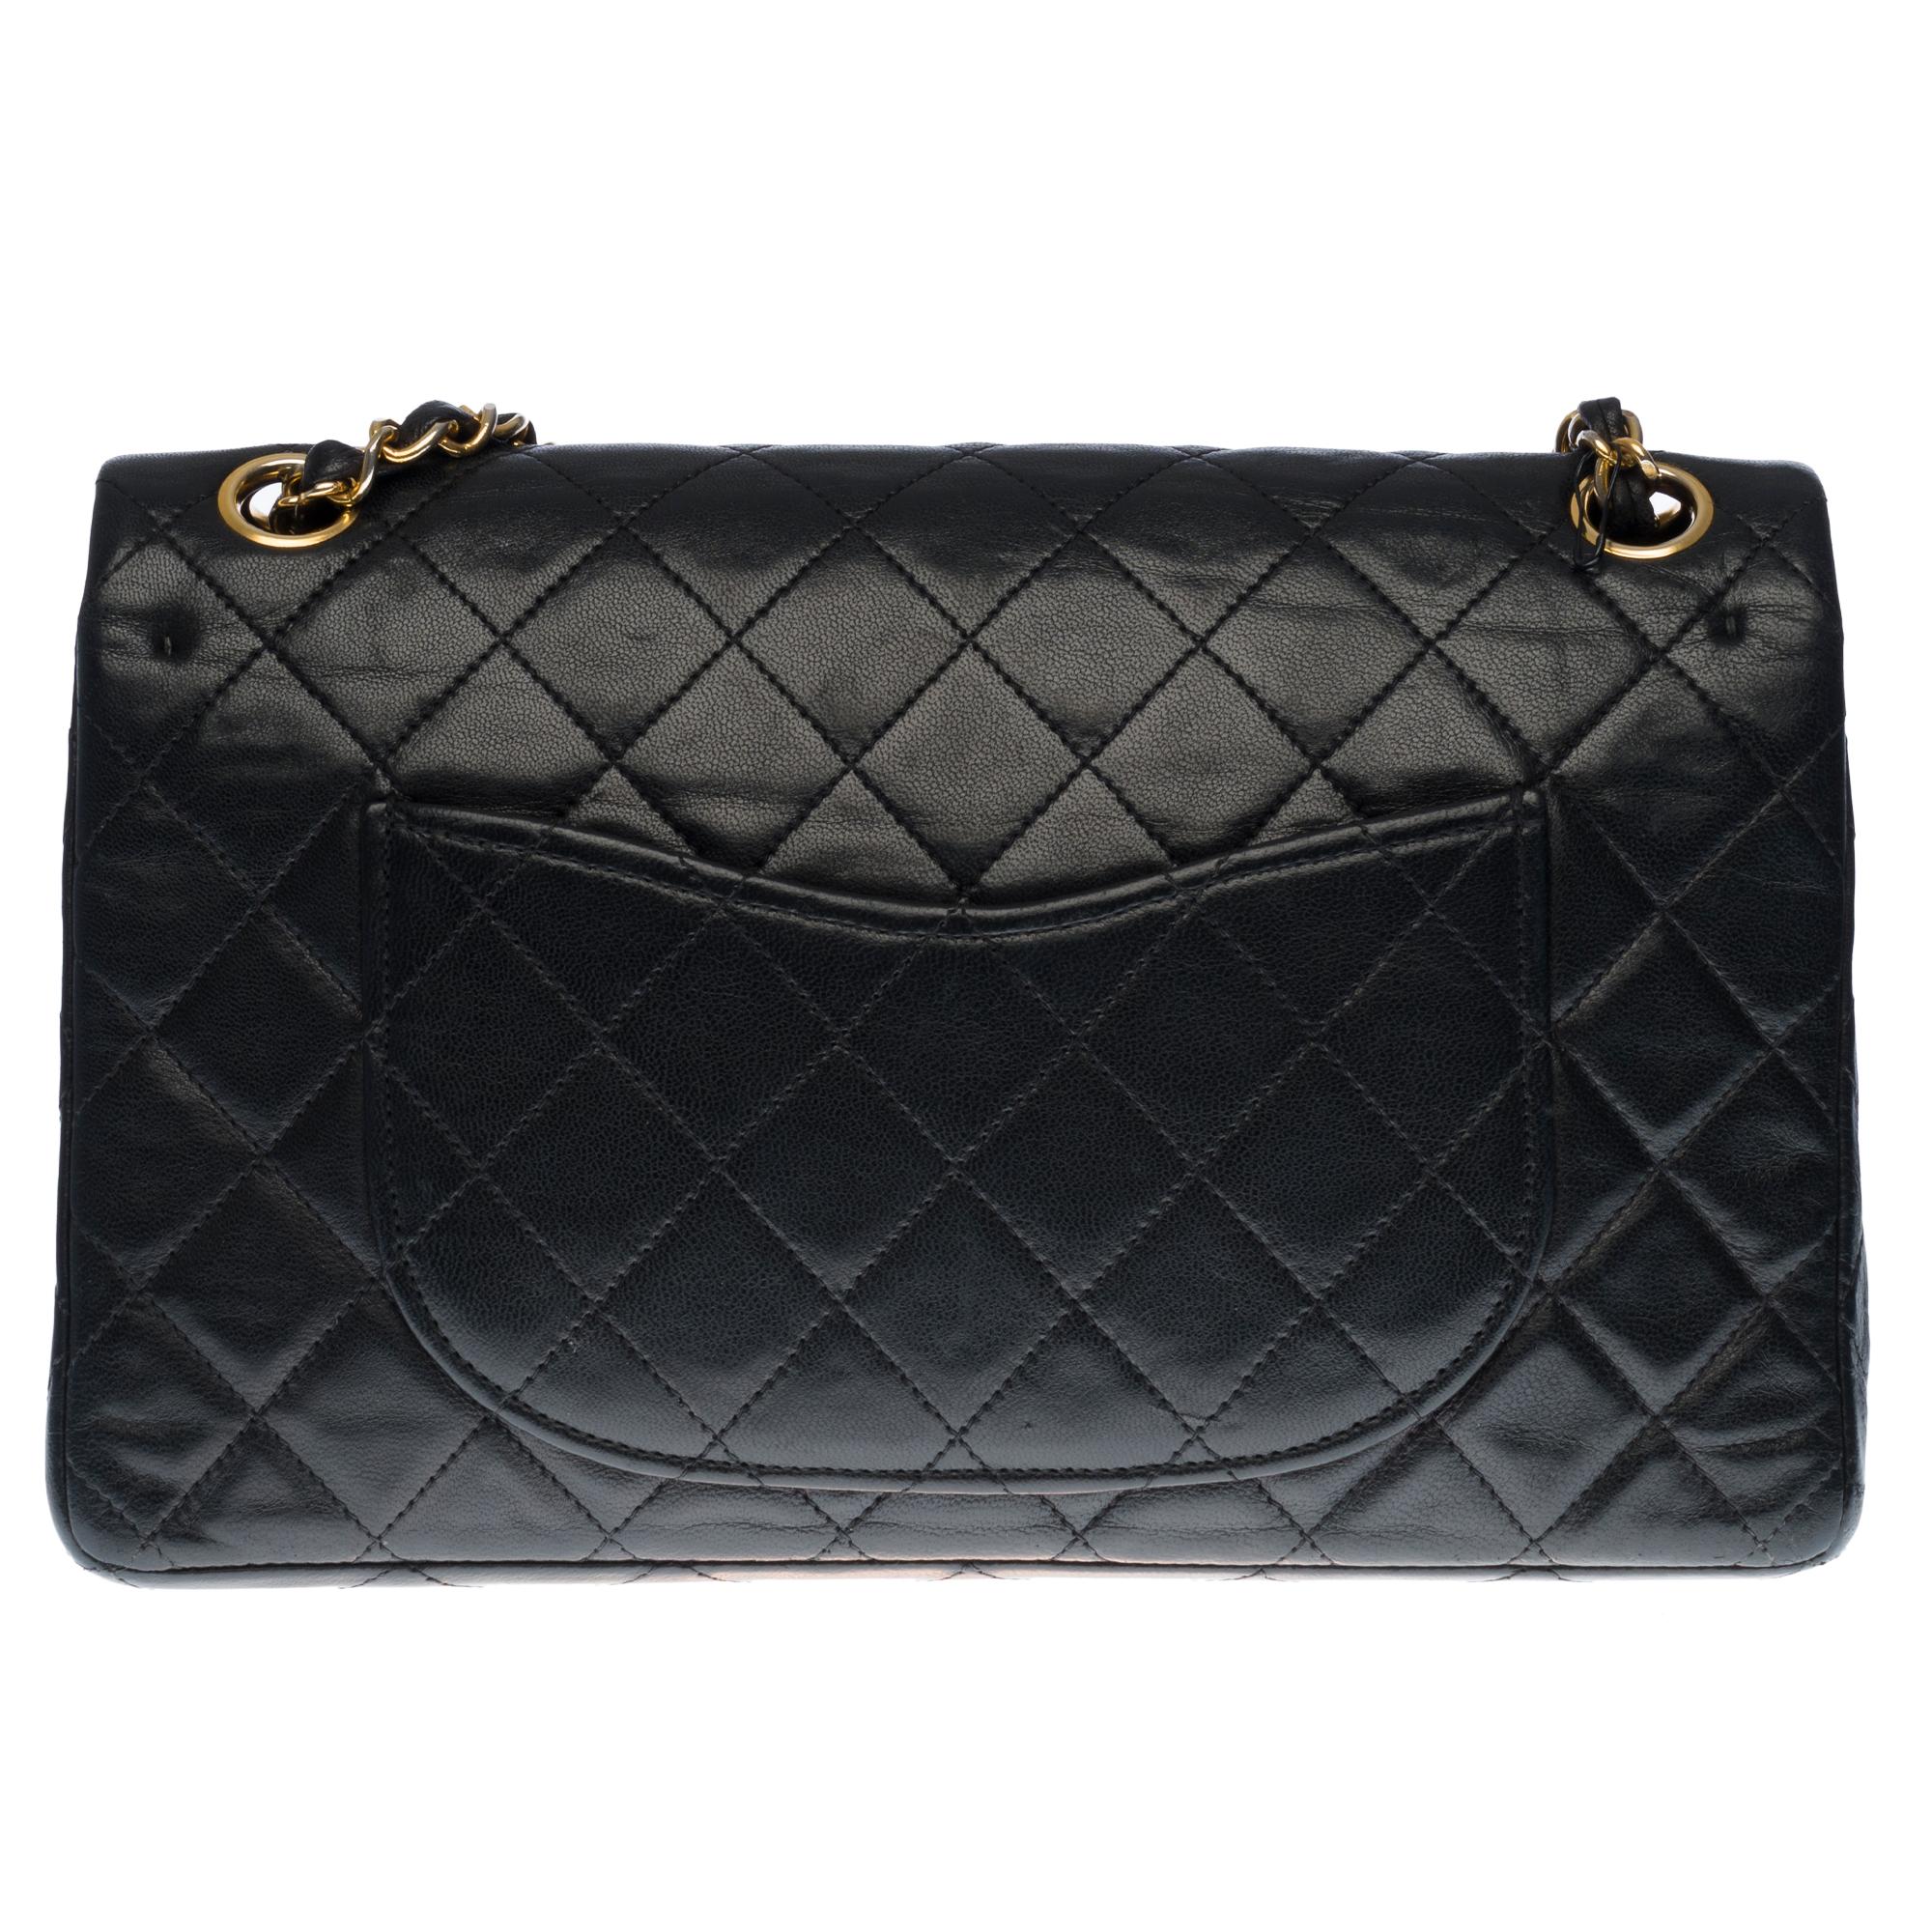 Black Chanel Timeless Medium Double Flap Shoulder bag in black quilted lambskin, GHW